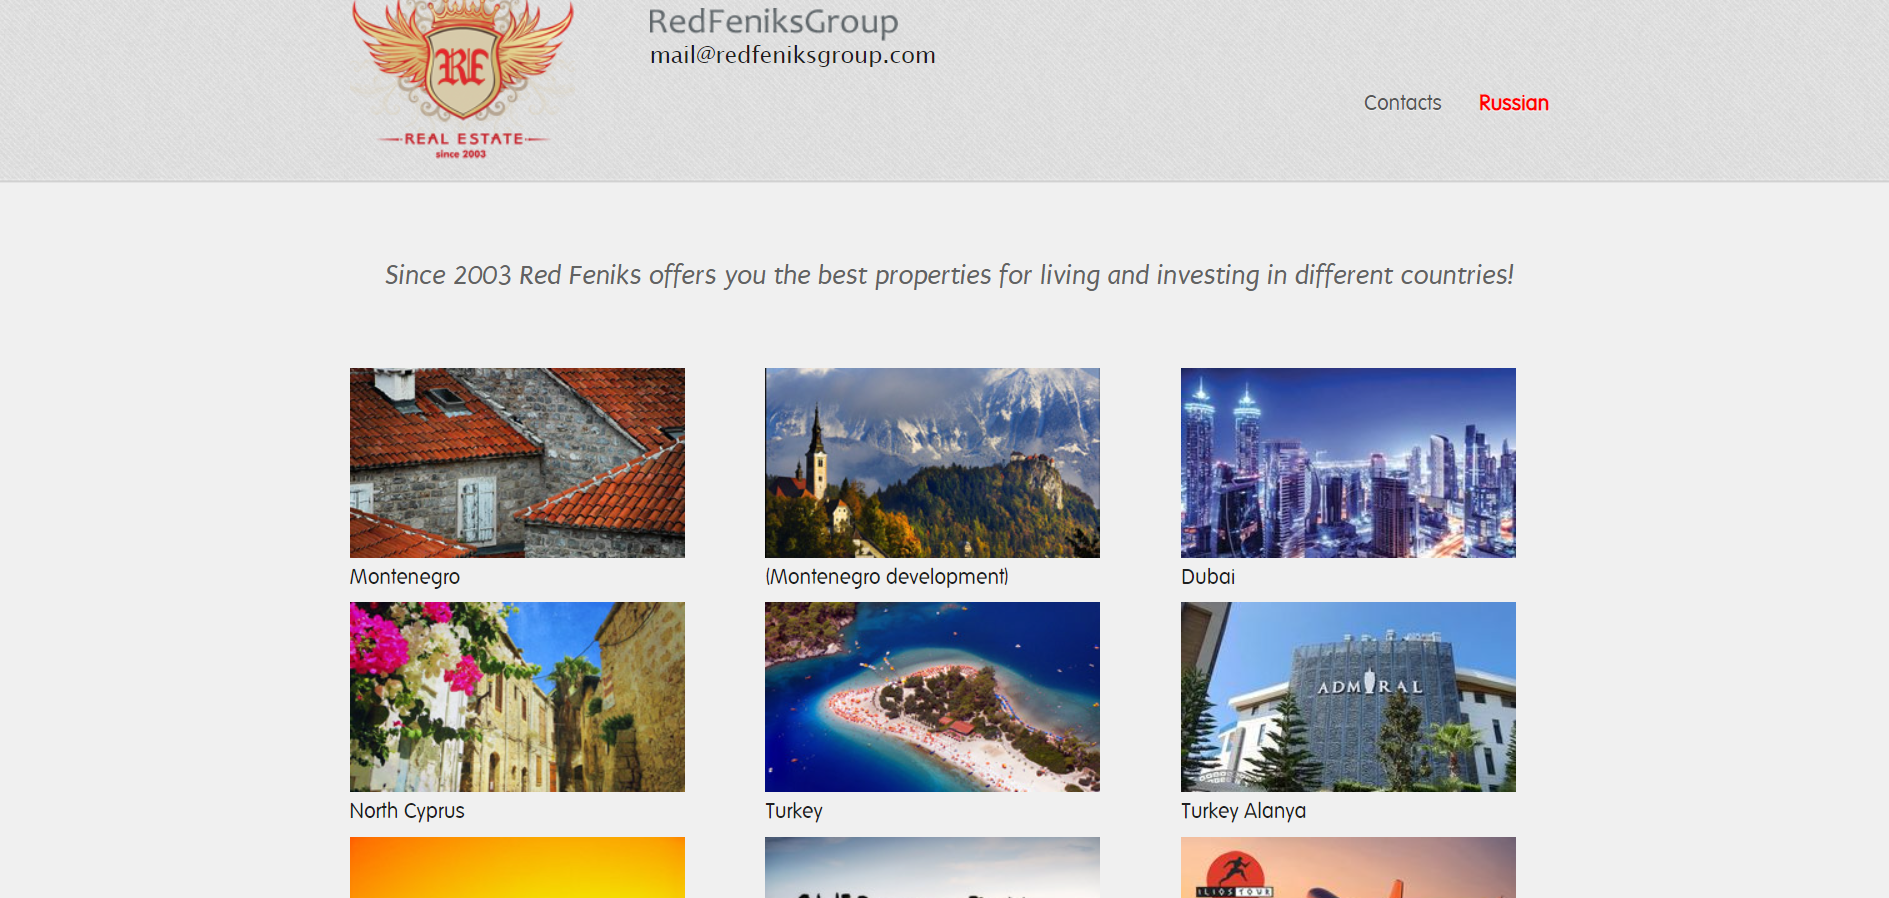 Experience with the Real Estate Agency Red Feniks